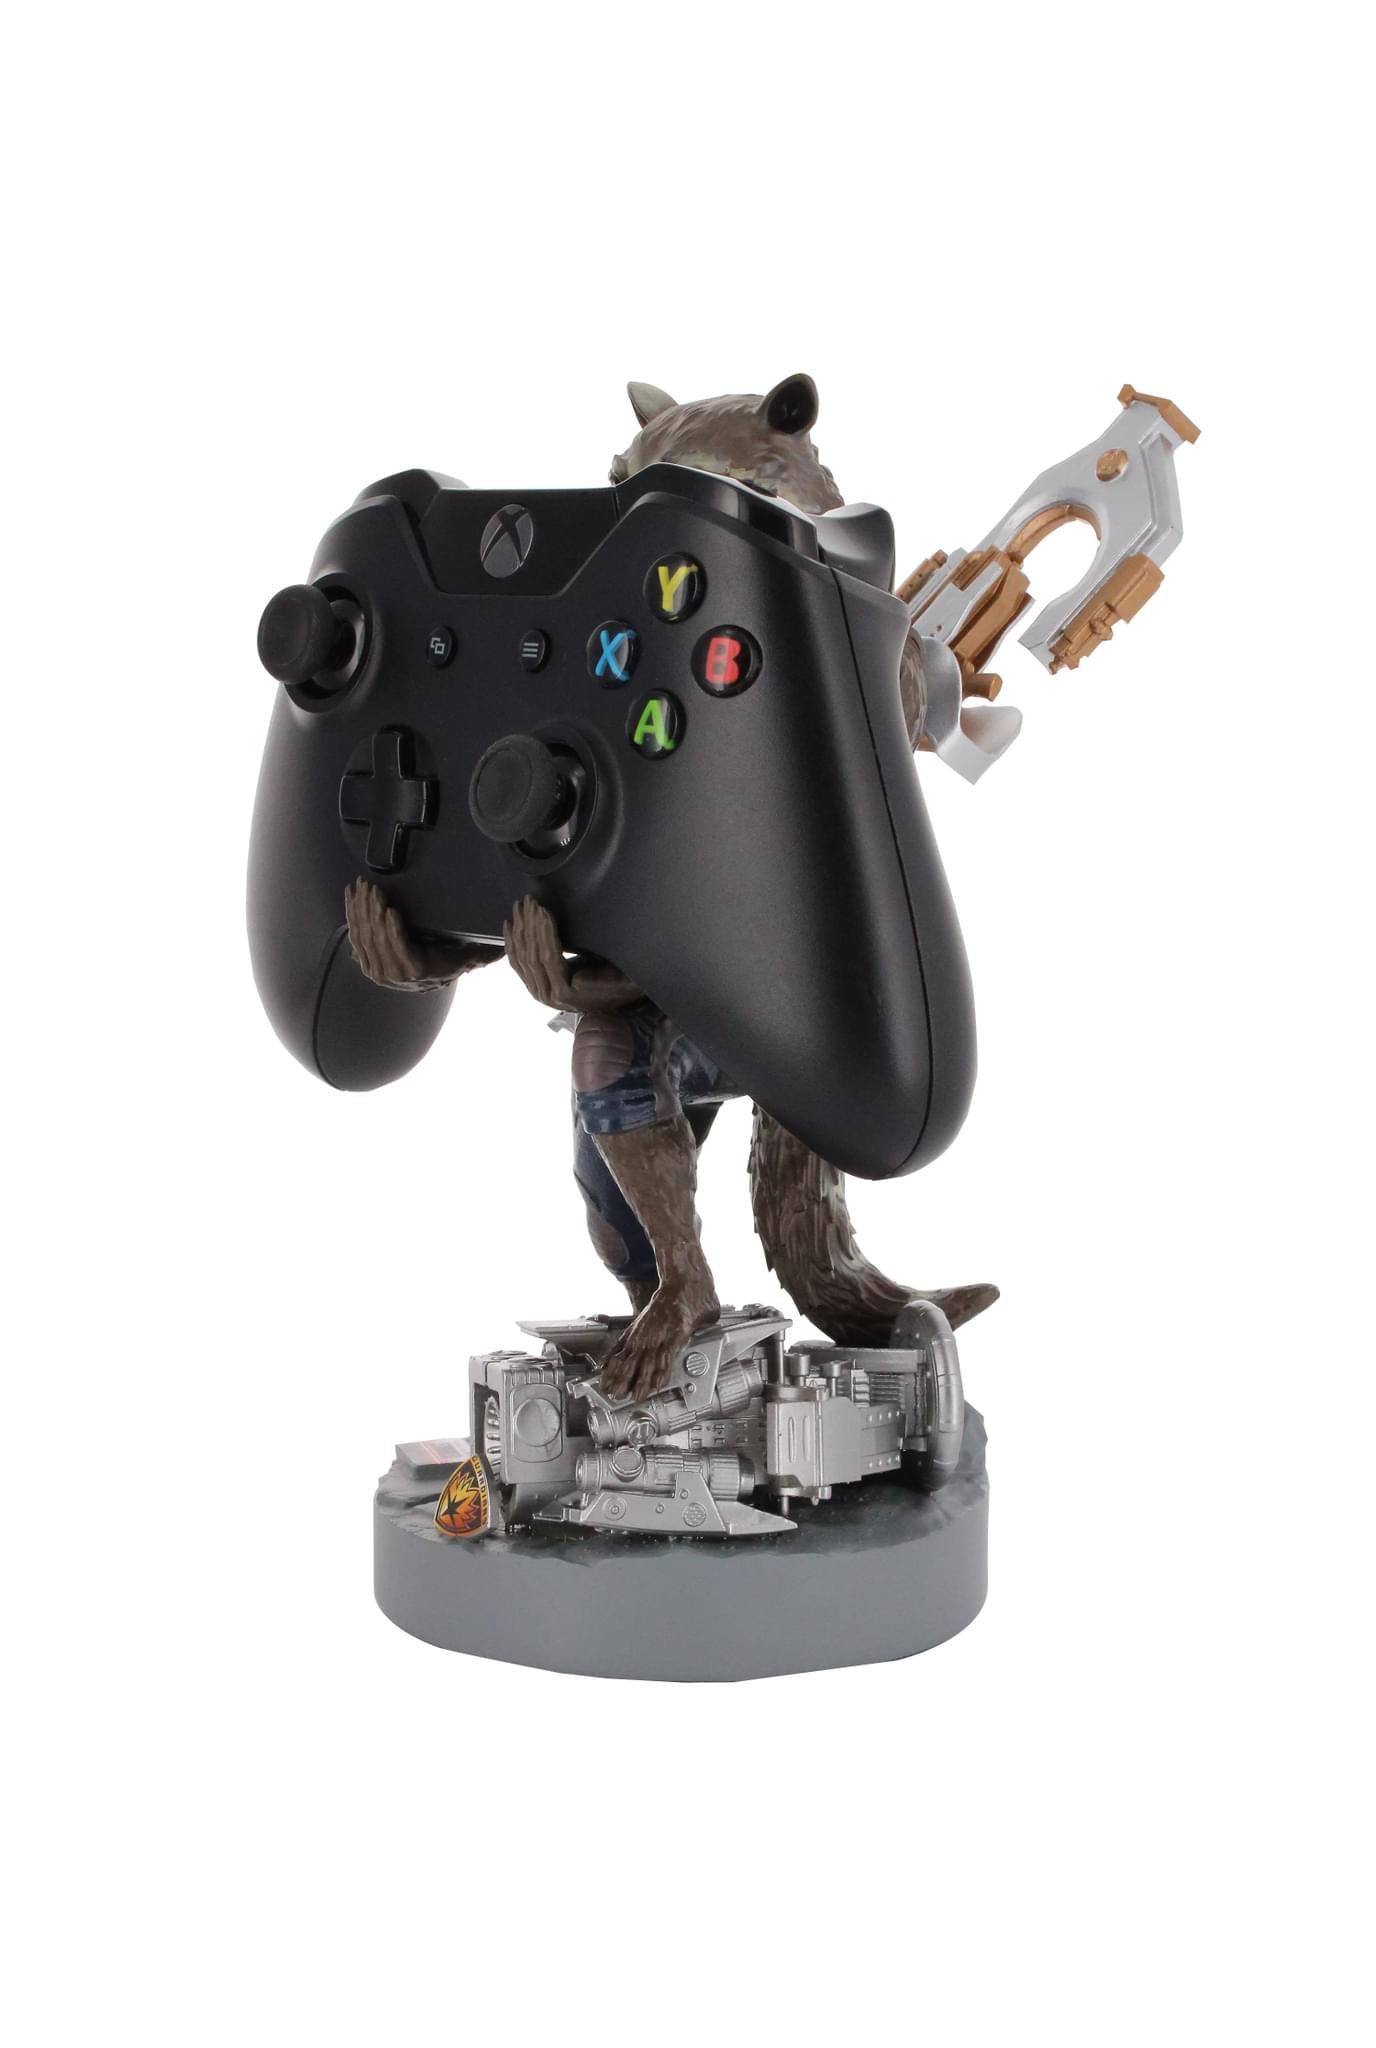 Rocket Racoon Holding Controller